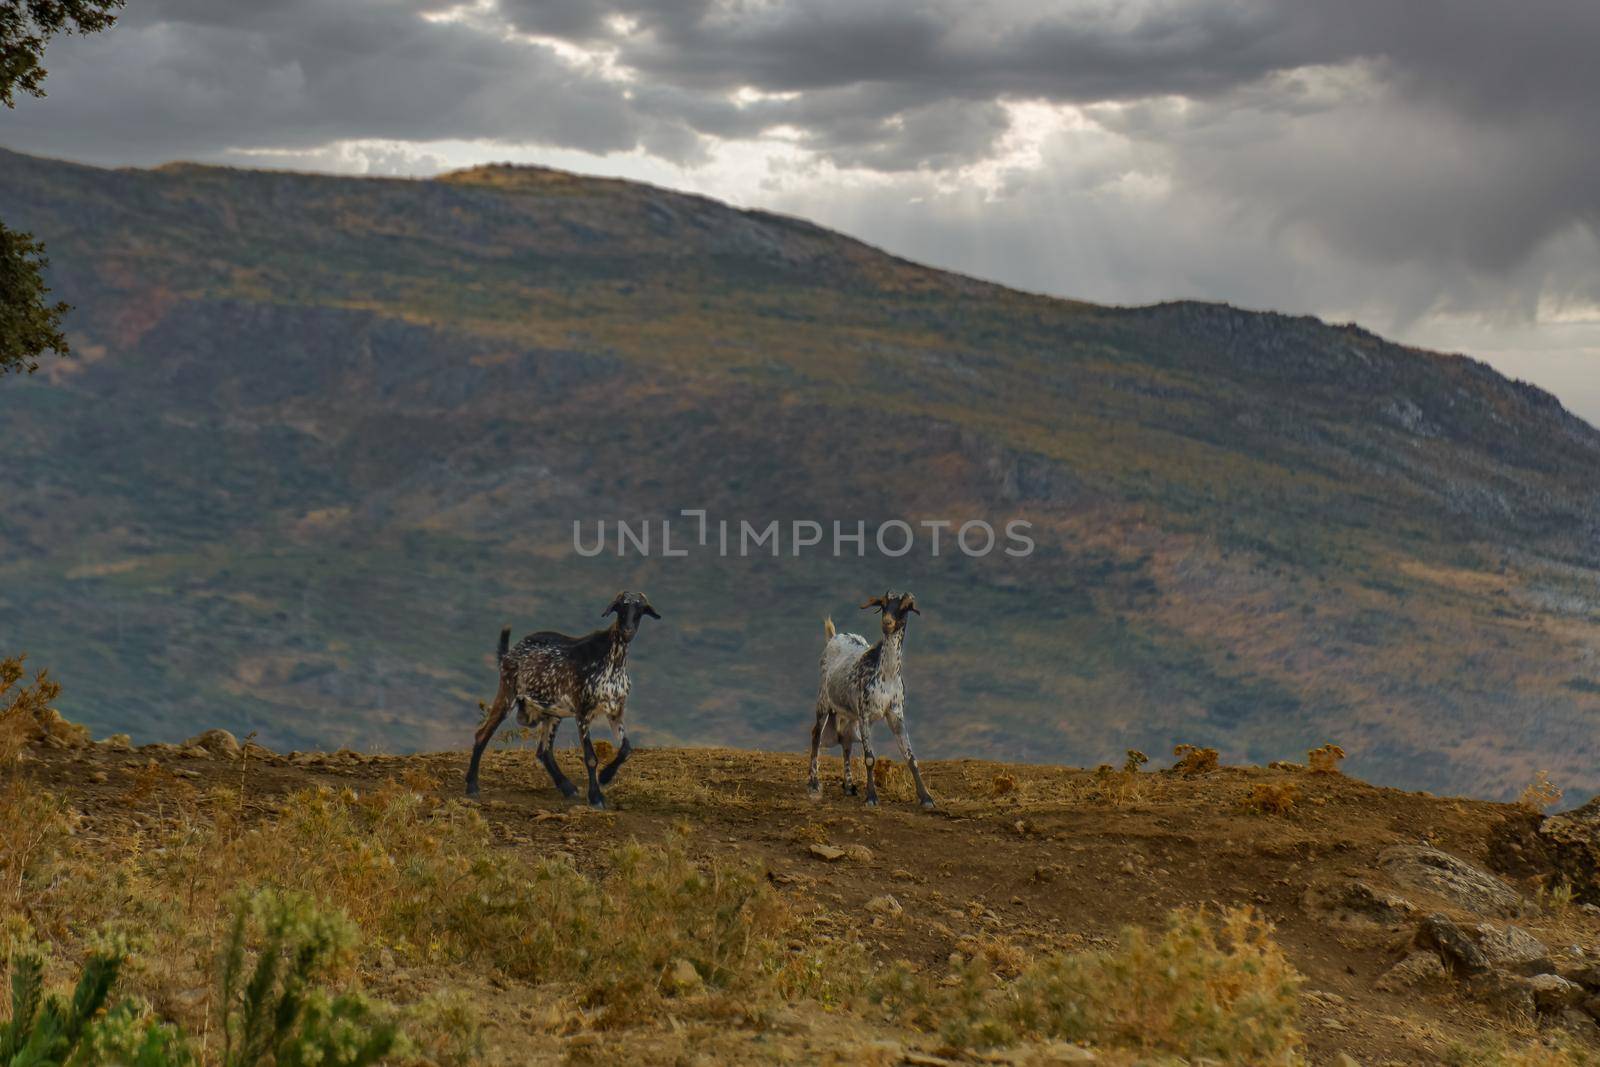 pair of male and female goats on the mountain with mountain scenery and cloudy sky in the background